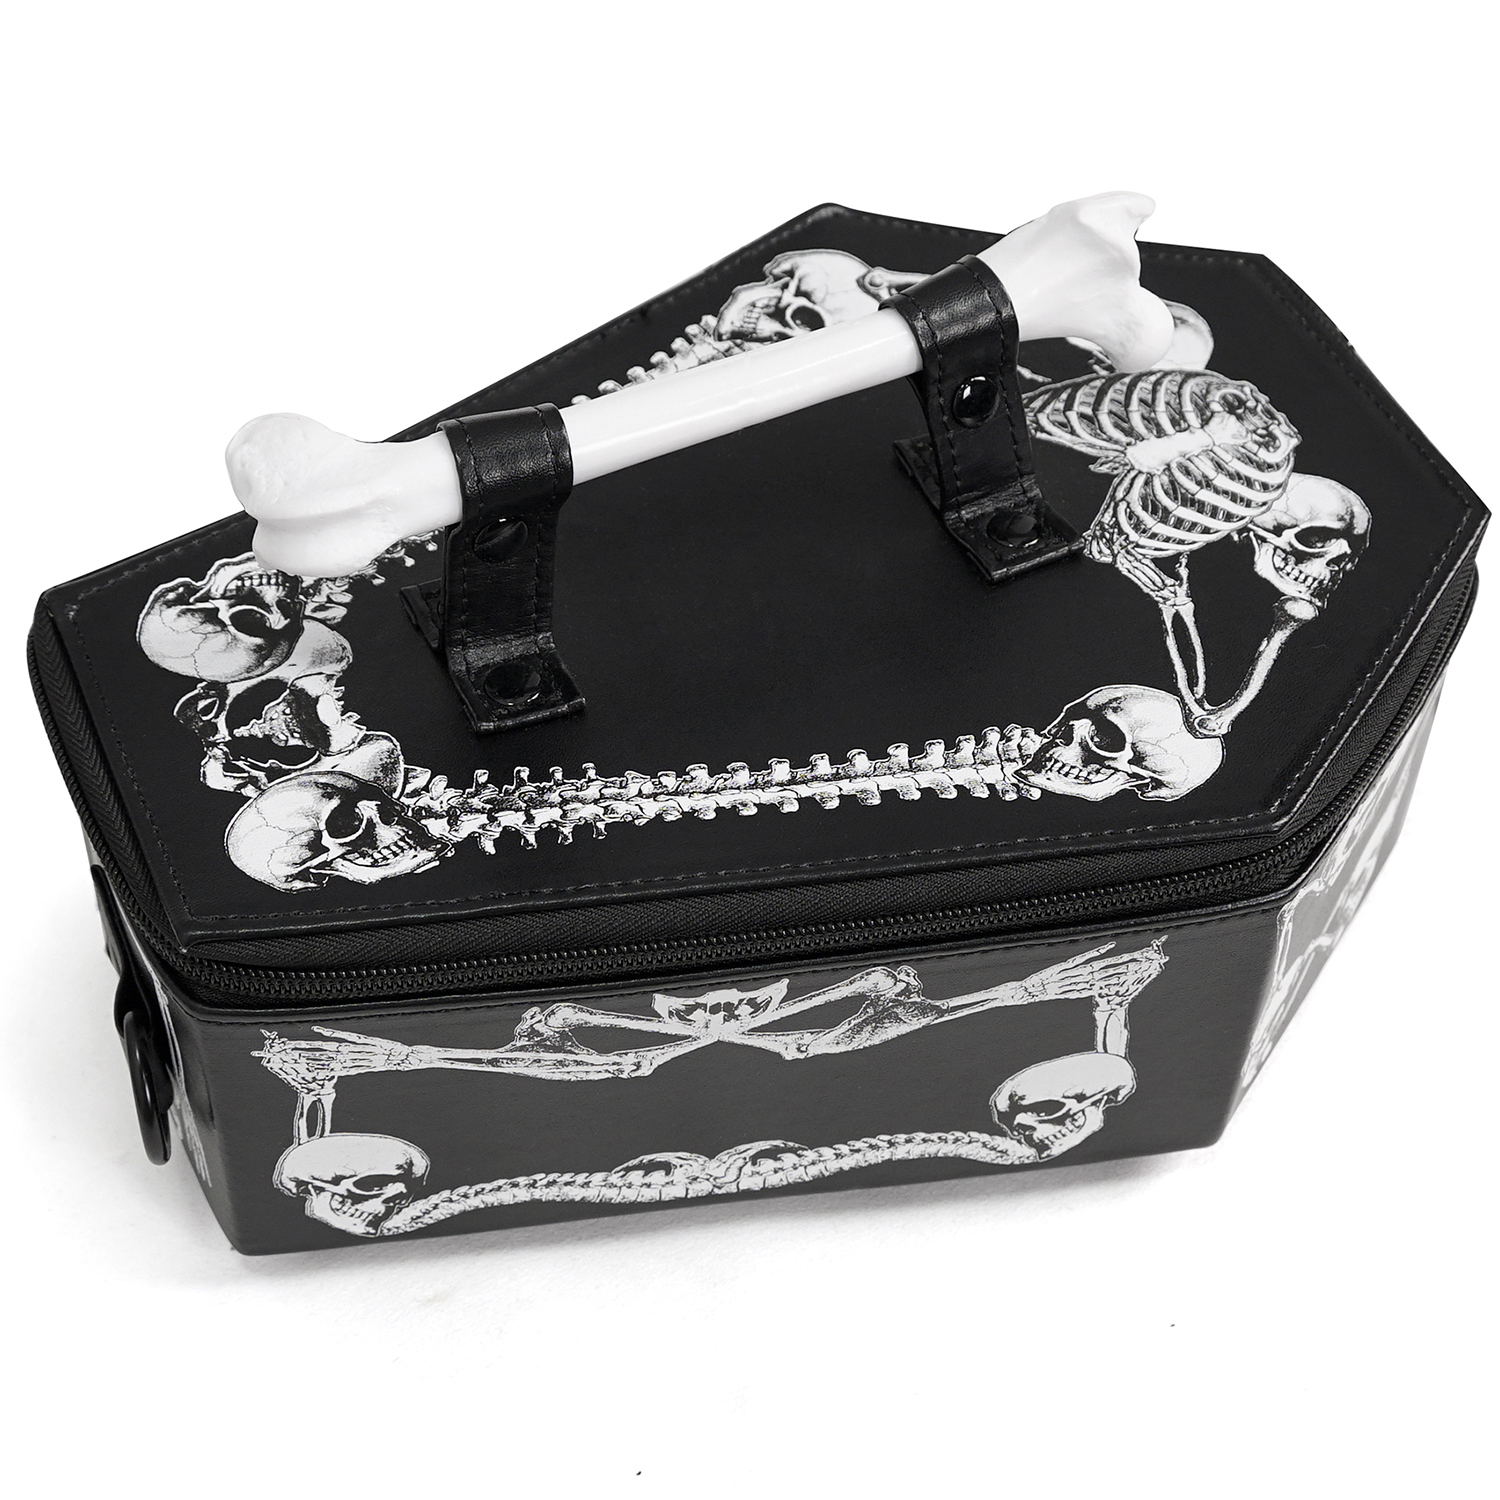 Lost Queen Goth Punk Handbag - Black with Handcuff & Skull Charms in 2023